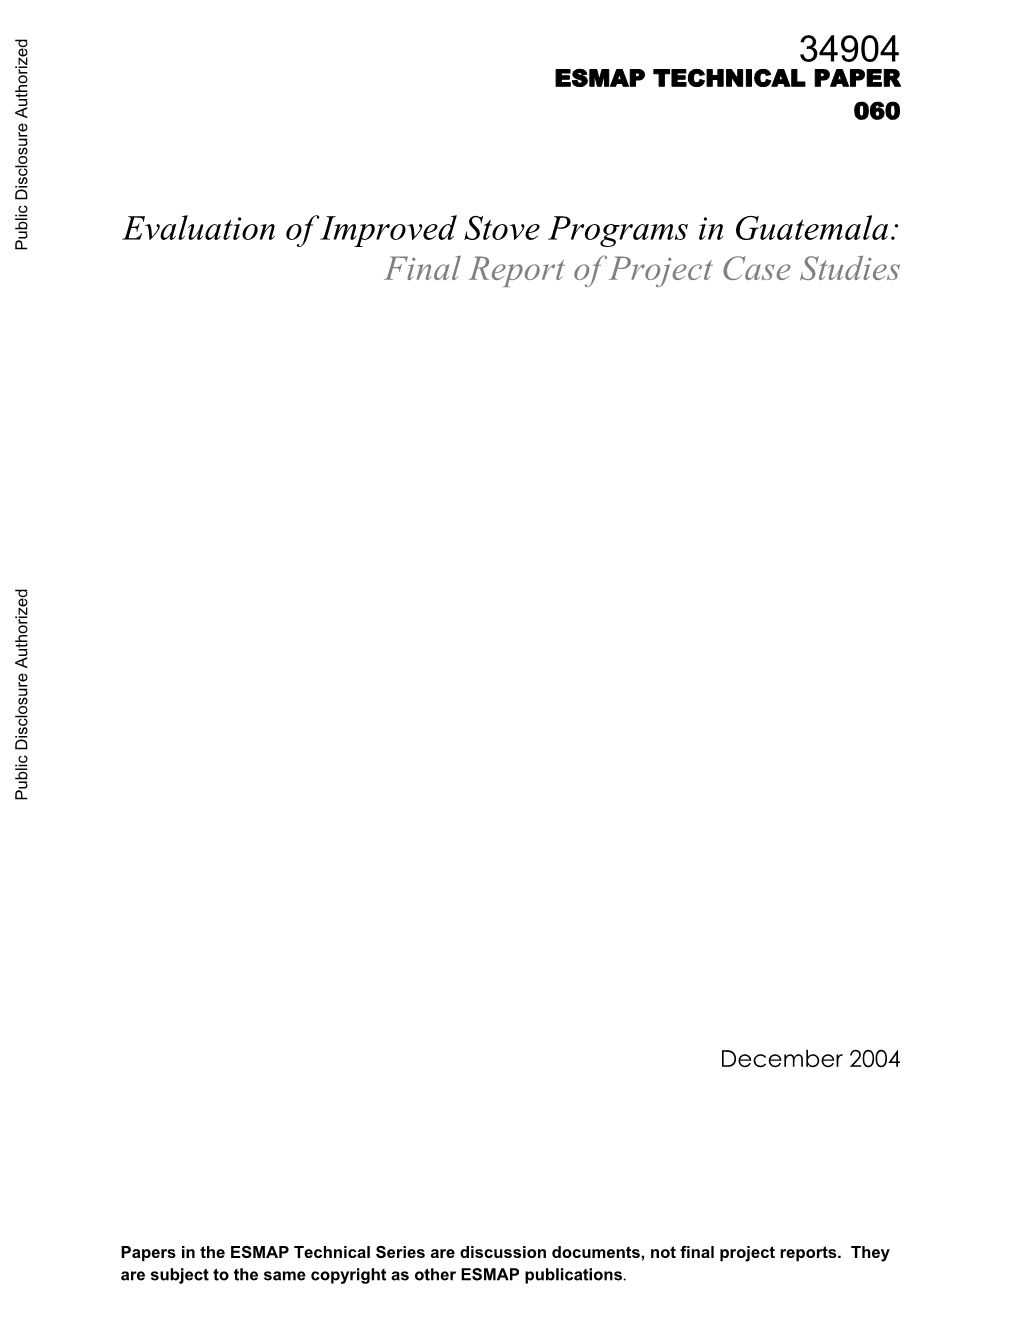 Evaluation of Improved Stove Programs in Guatemala: Public Disclosure Authorized Final Report of Project Case Studies